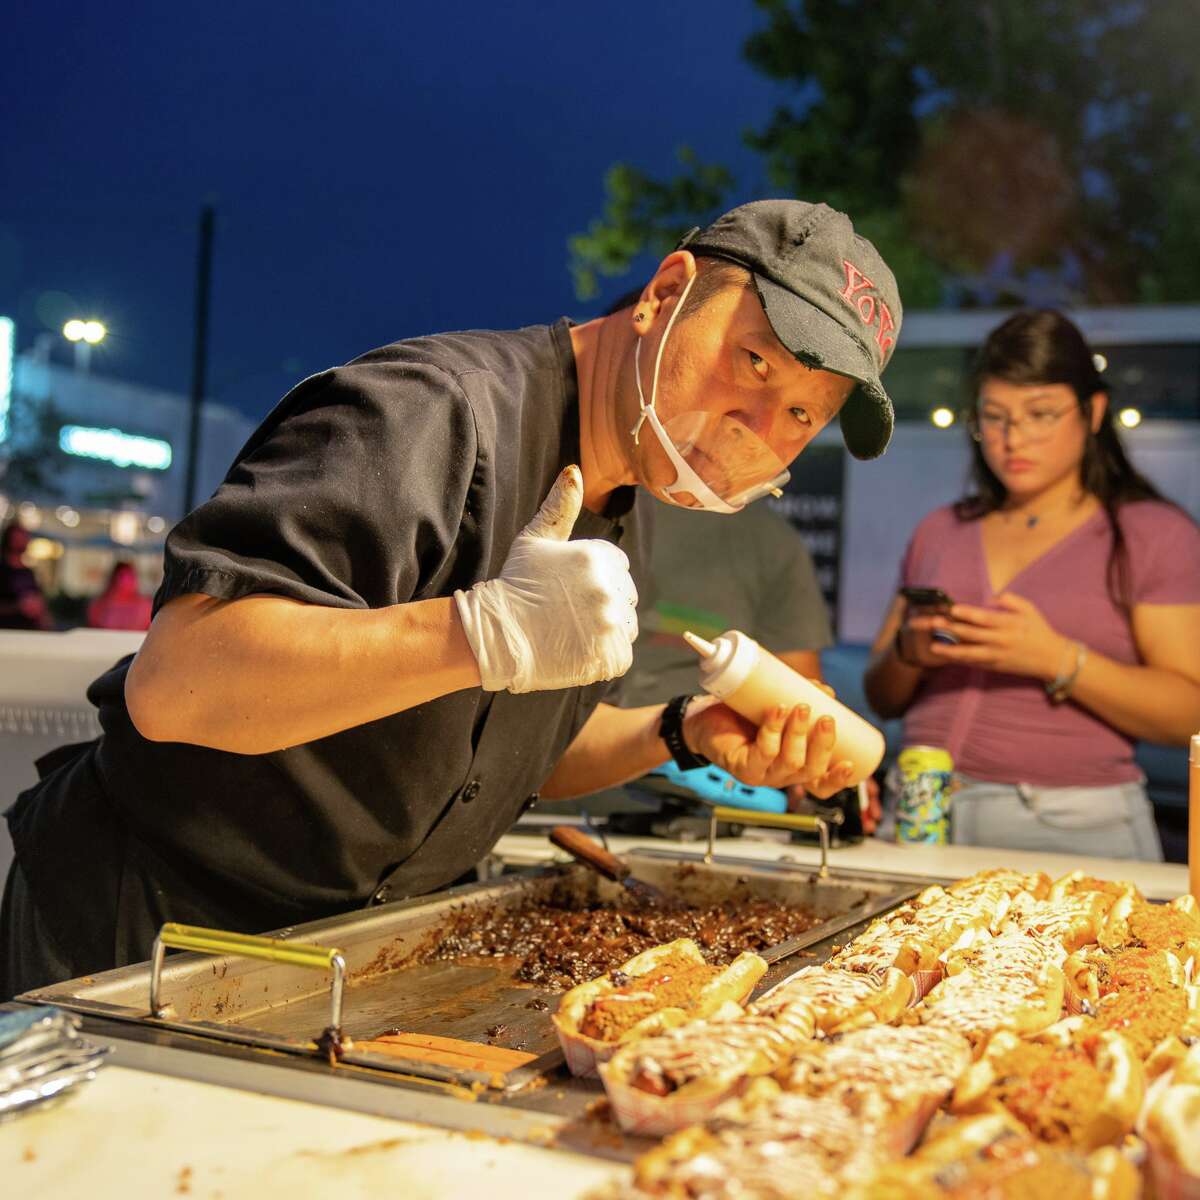 Danny "Yoyo" Kim serves and cooks hotdogs from his eponymous hot dog cart in Rice Village.